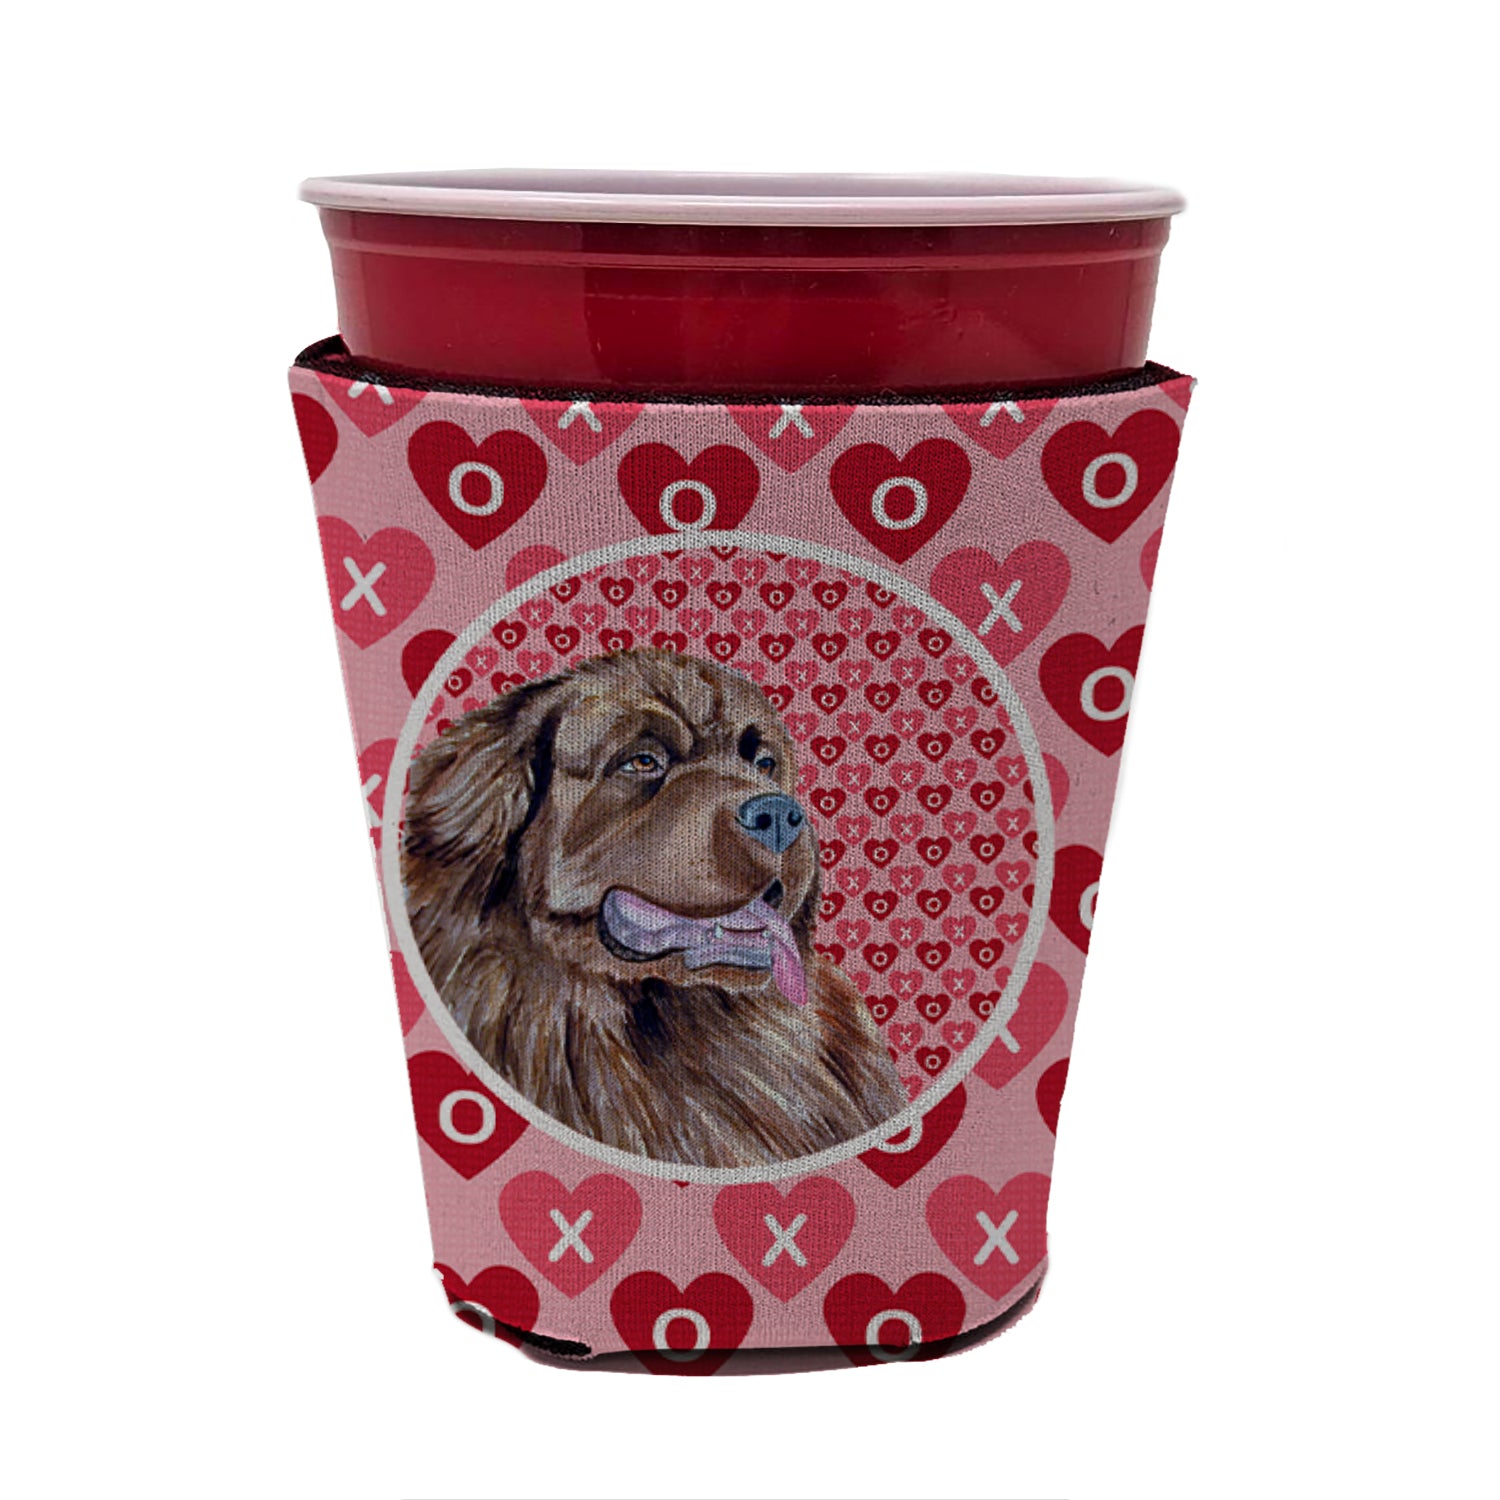 Terre-Neuve Valentine's Love and Hearts Red Solo Cup Beverage Insulator Hugger